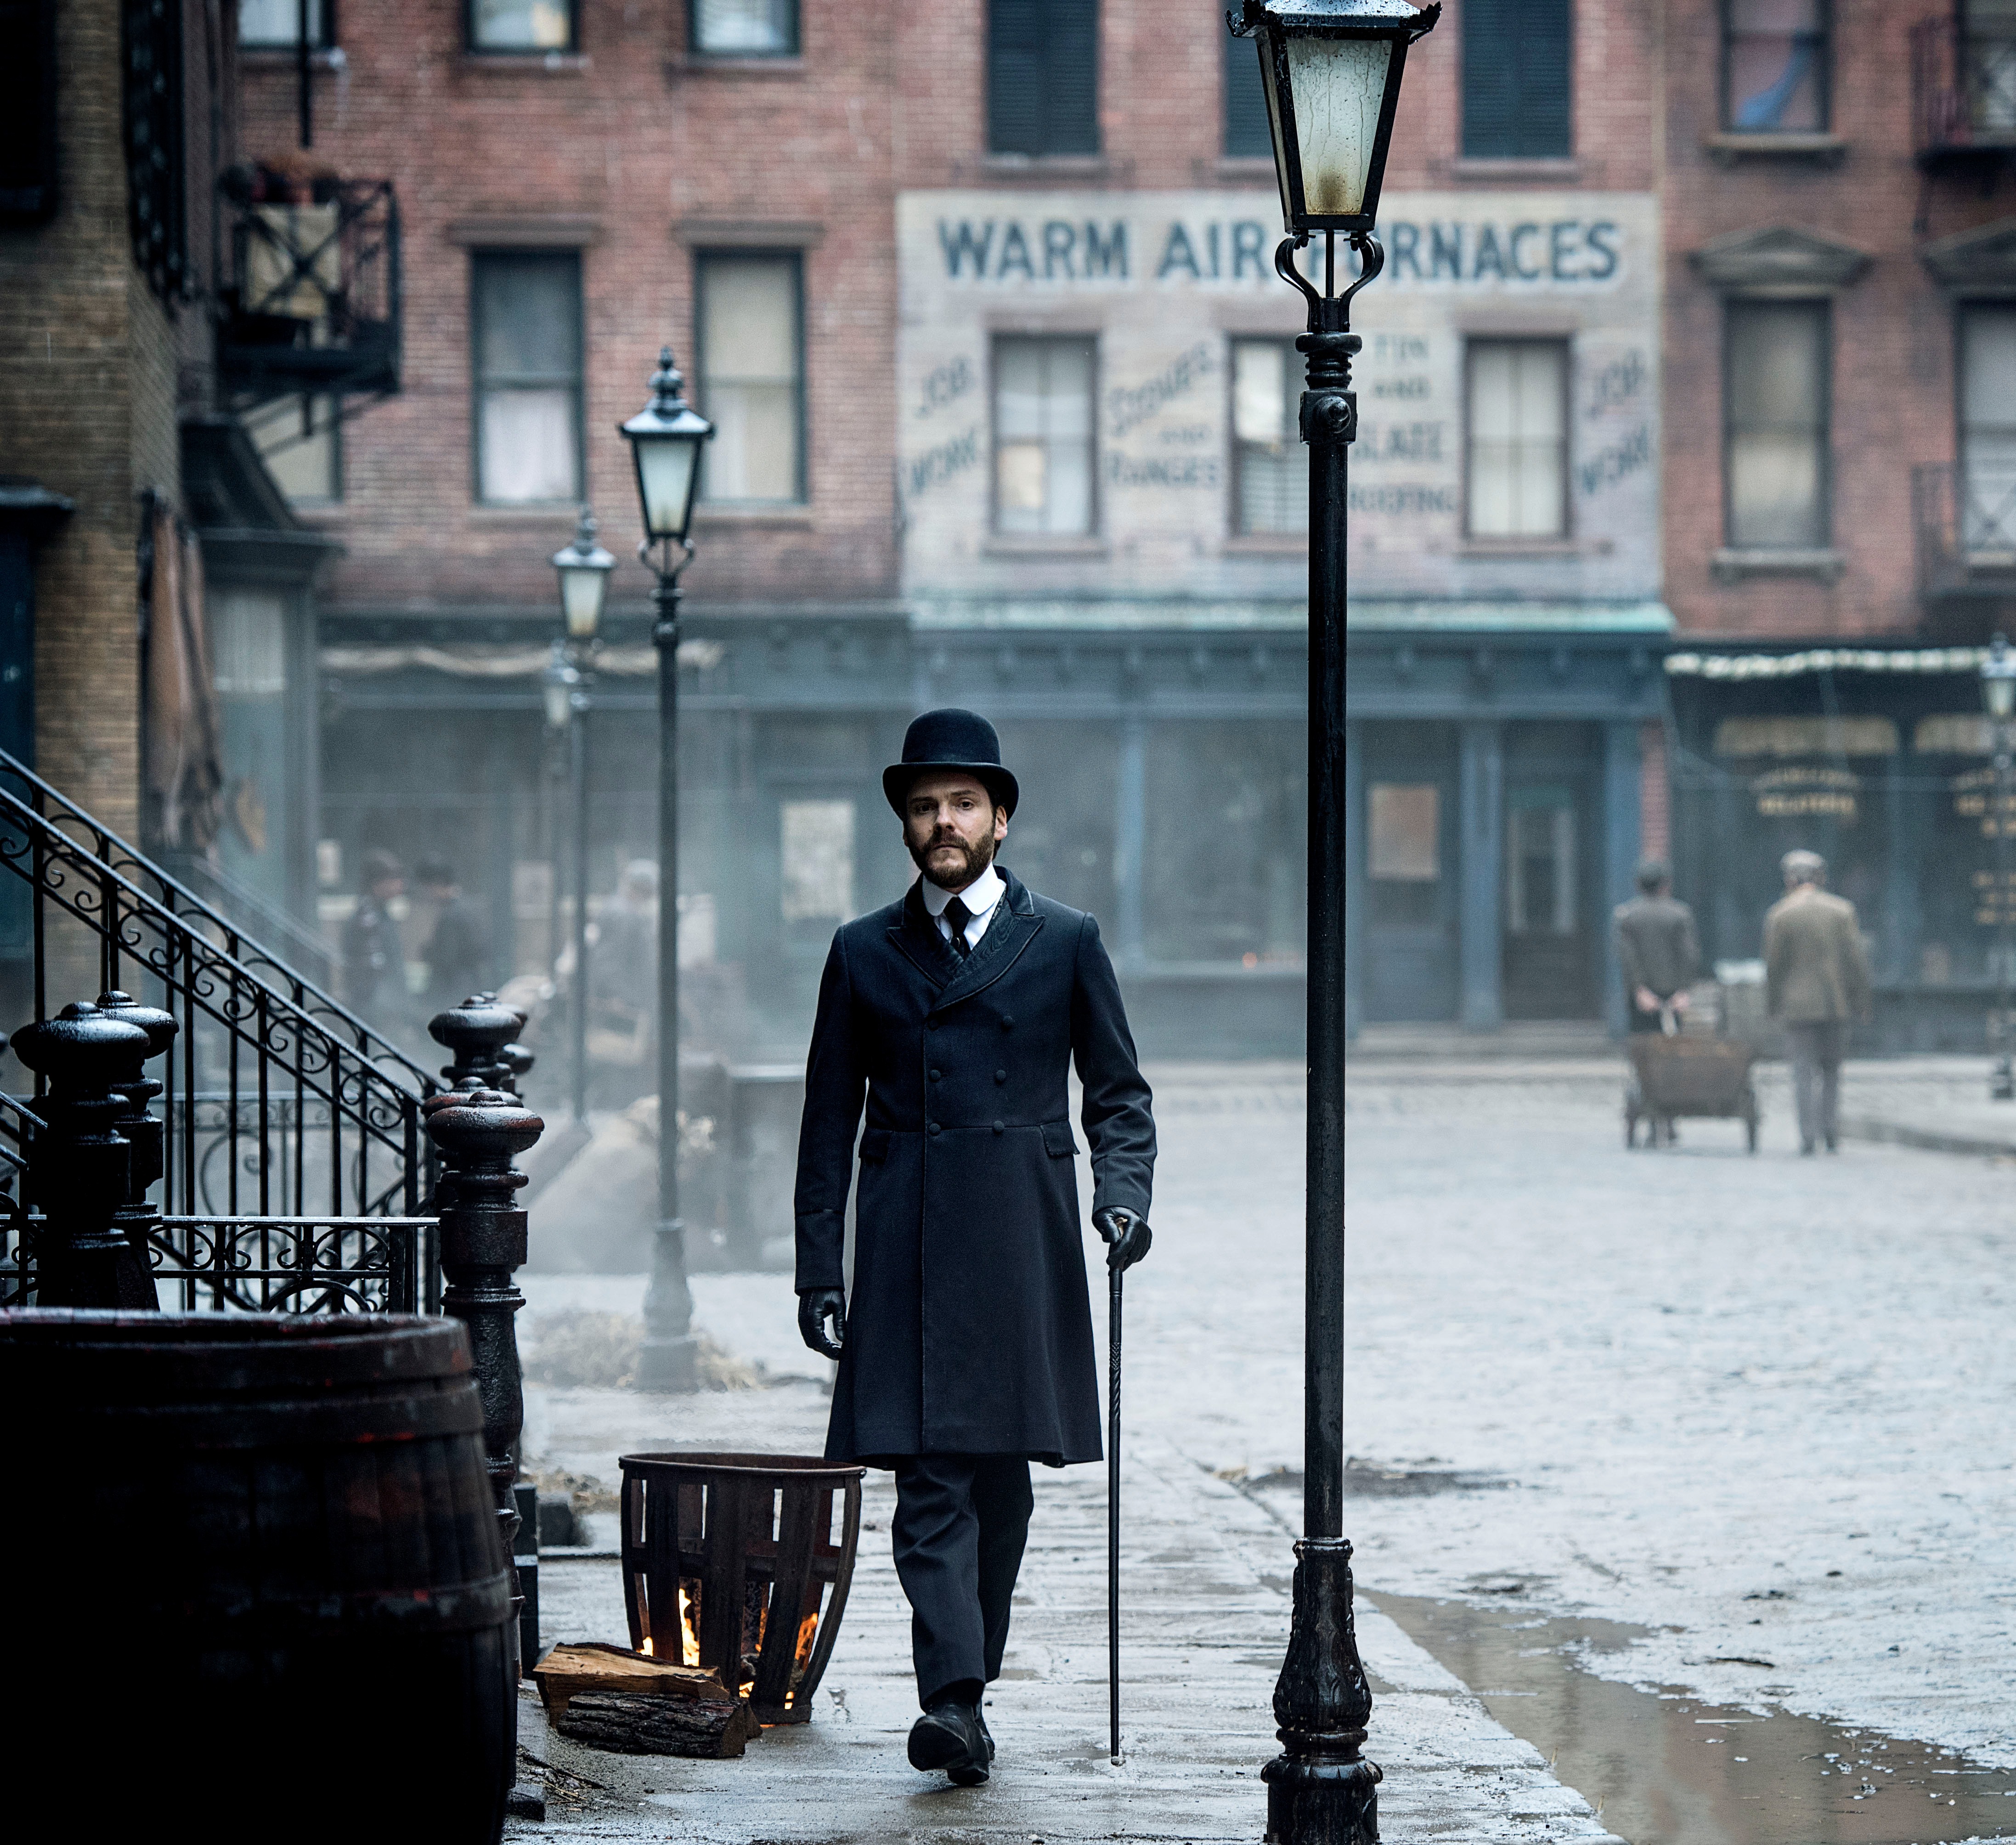 The Alienist 2020 Wallpapers